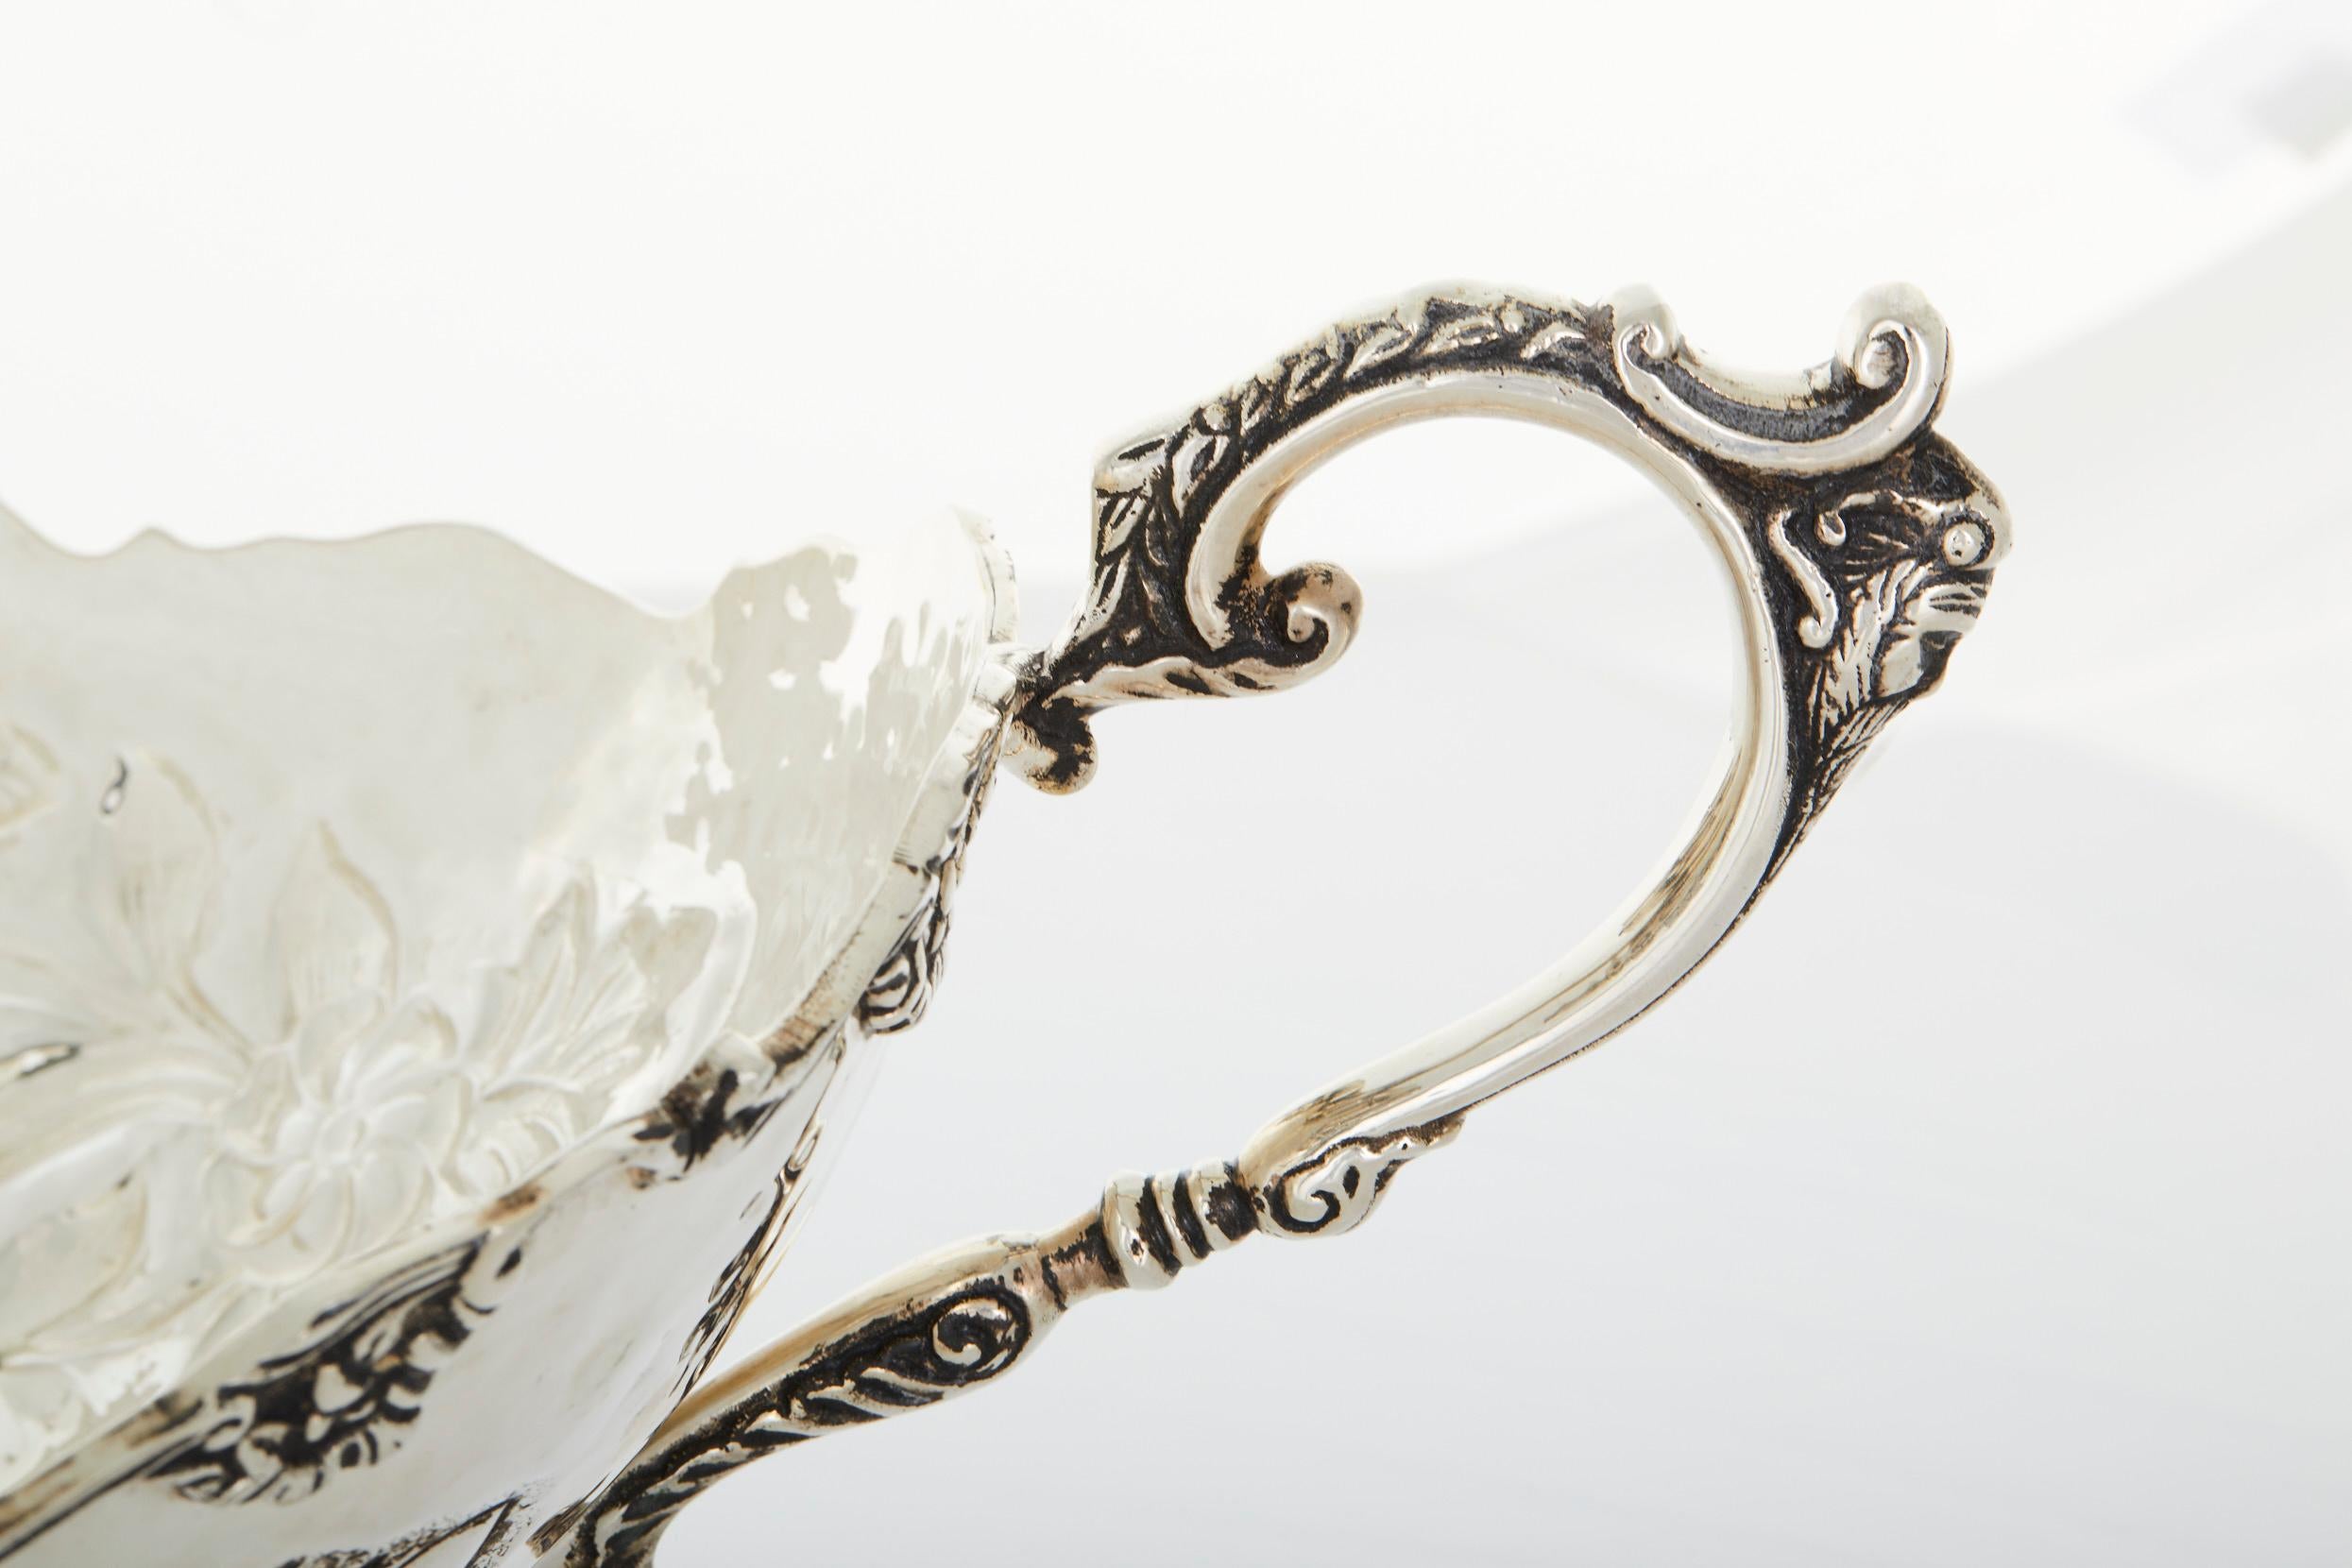 Early 20th century large Italian silver plate decorative piece / barware wine cooler . The piece features a round footed base with ornately exterior floral design detail and two side handles . The piece is in great condition . Minor wear consistent